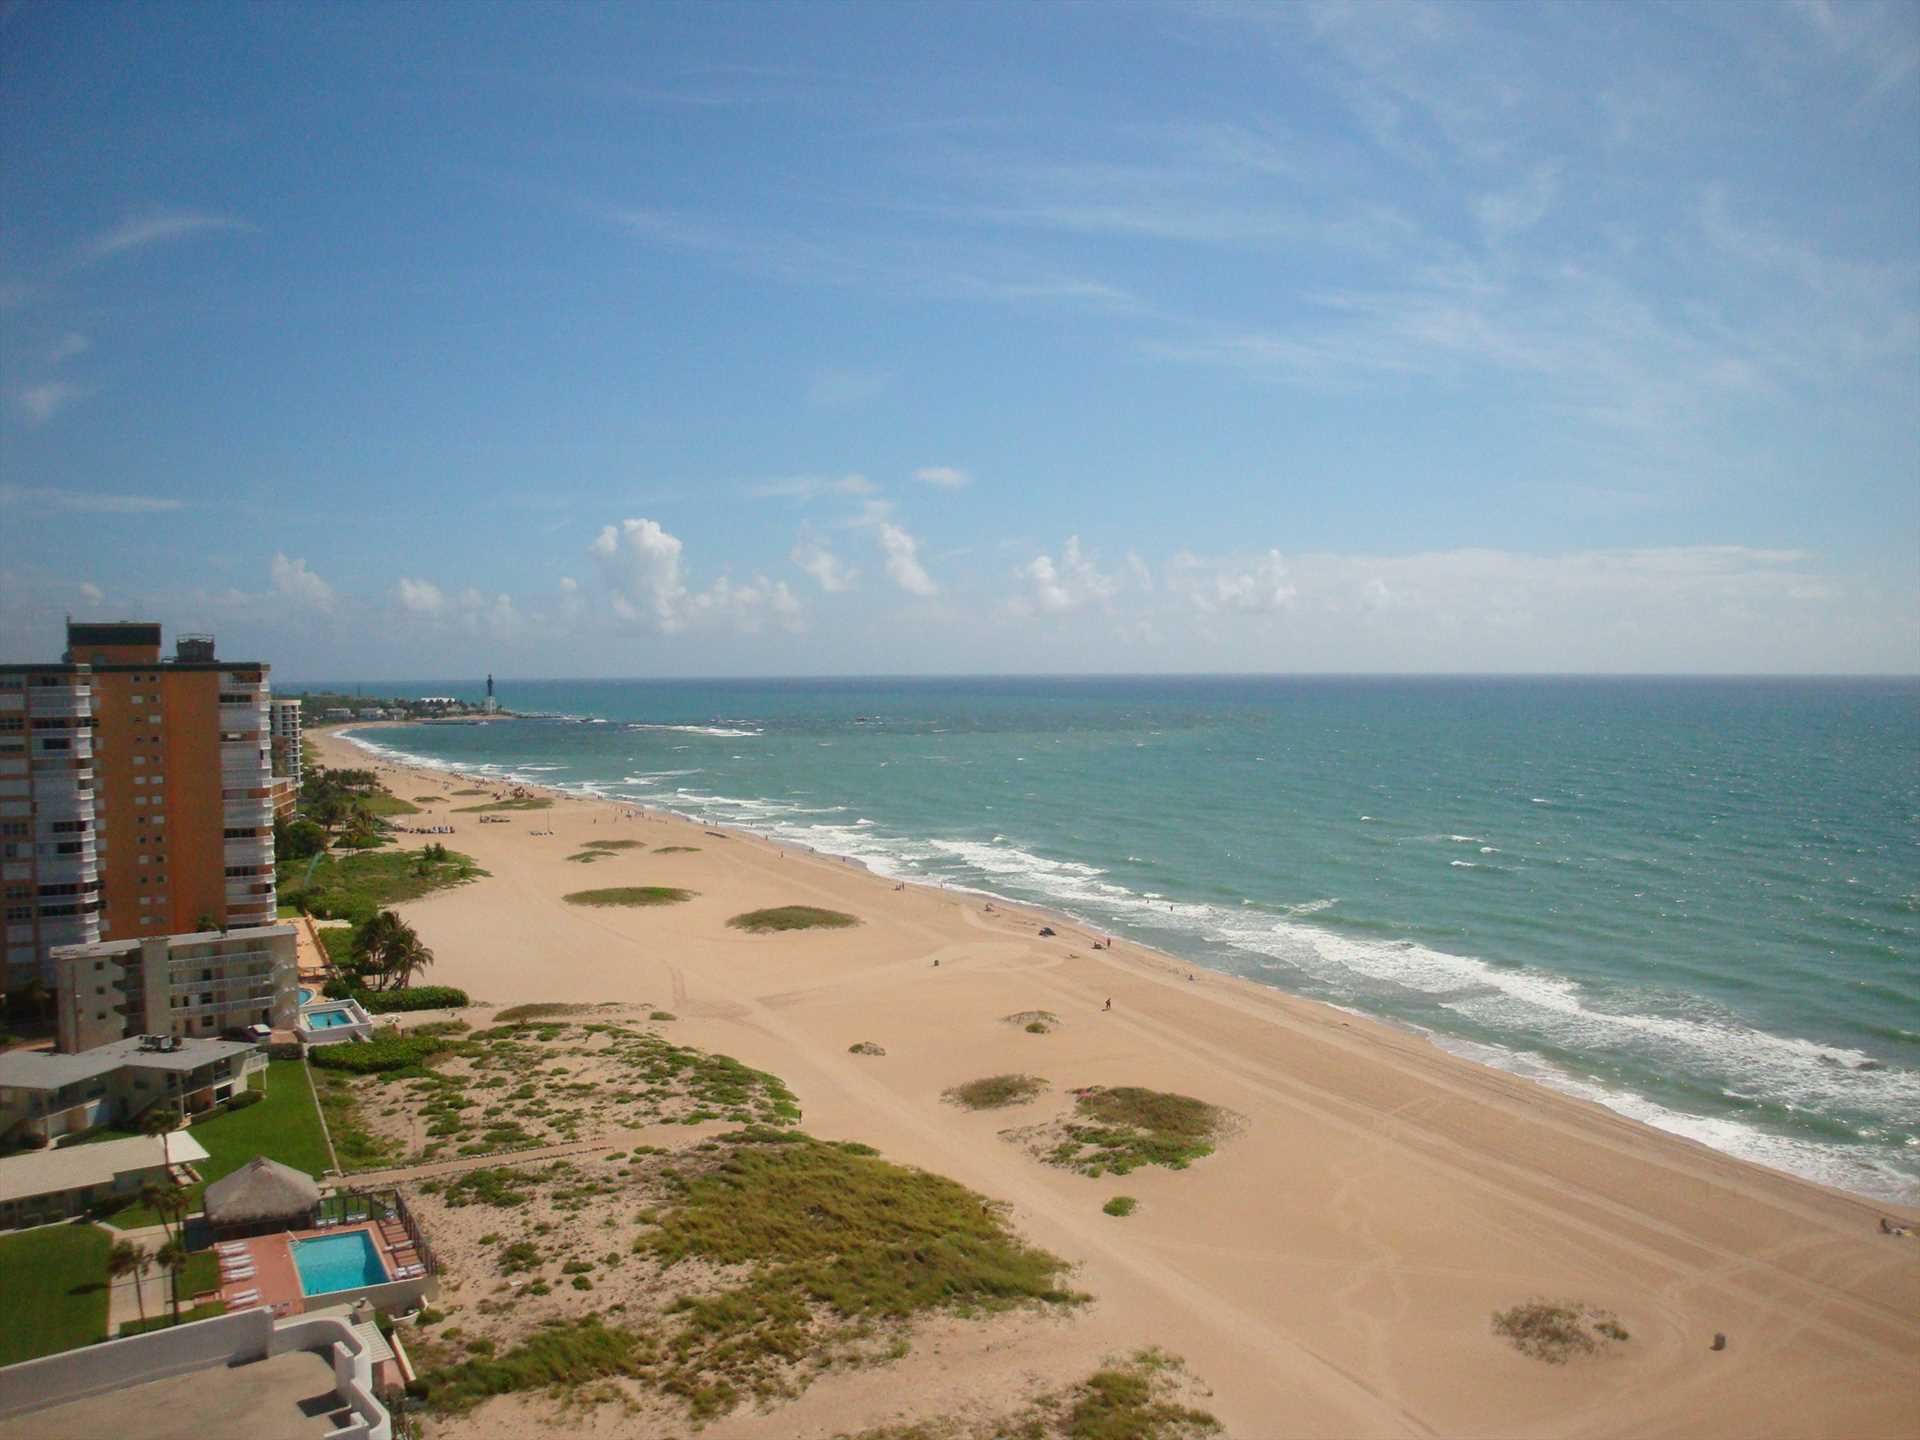 The warm Atlantic breezes, sand and surf await your arrival.